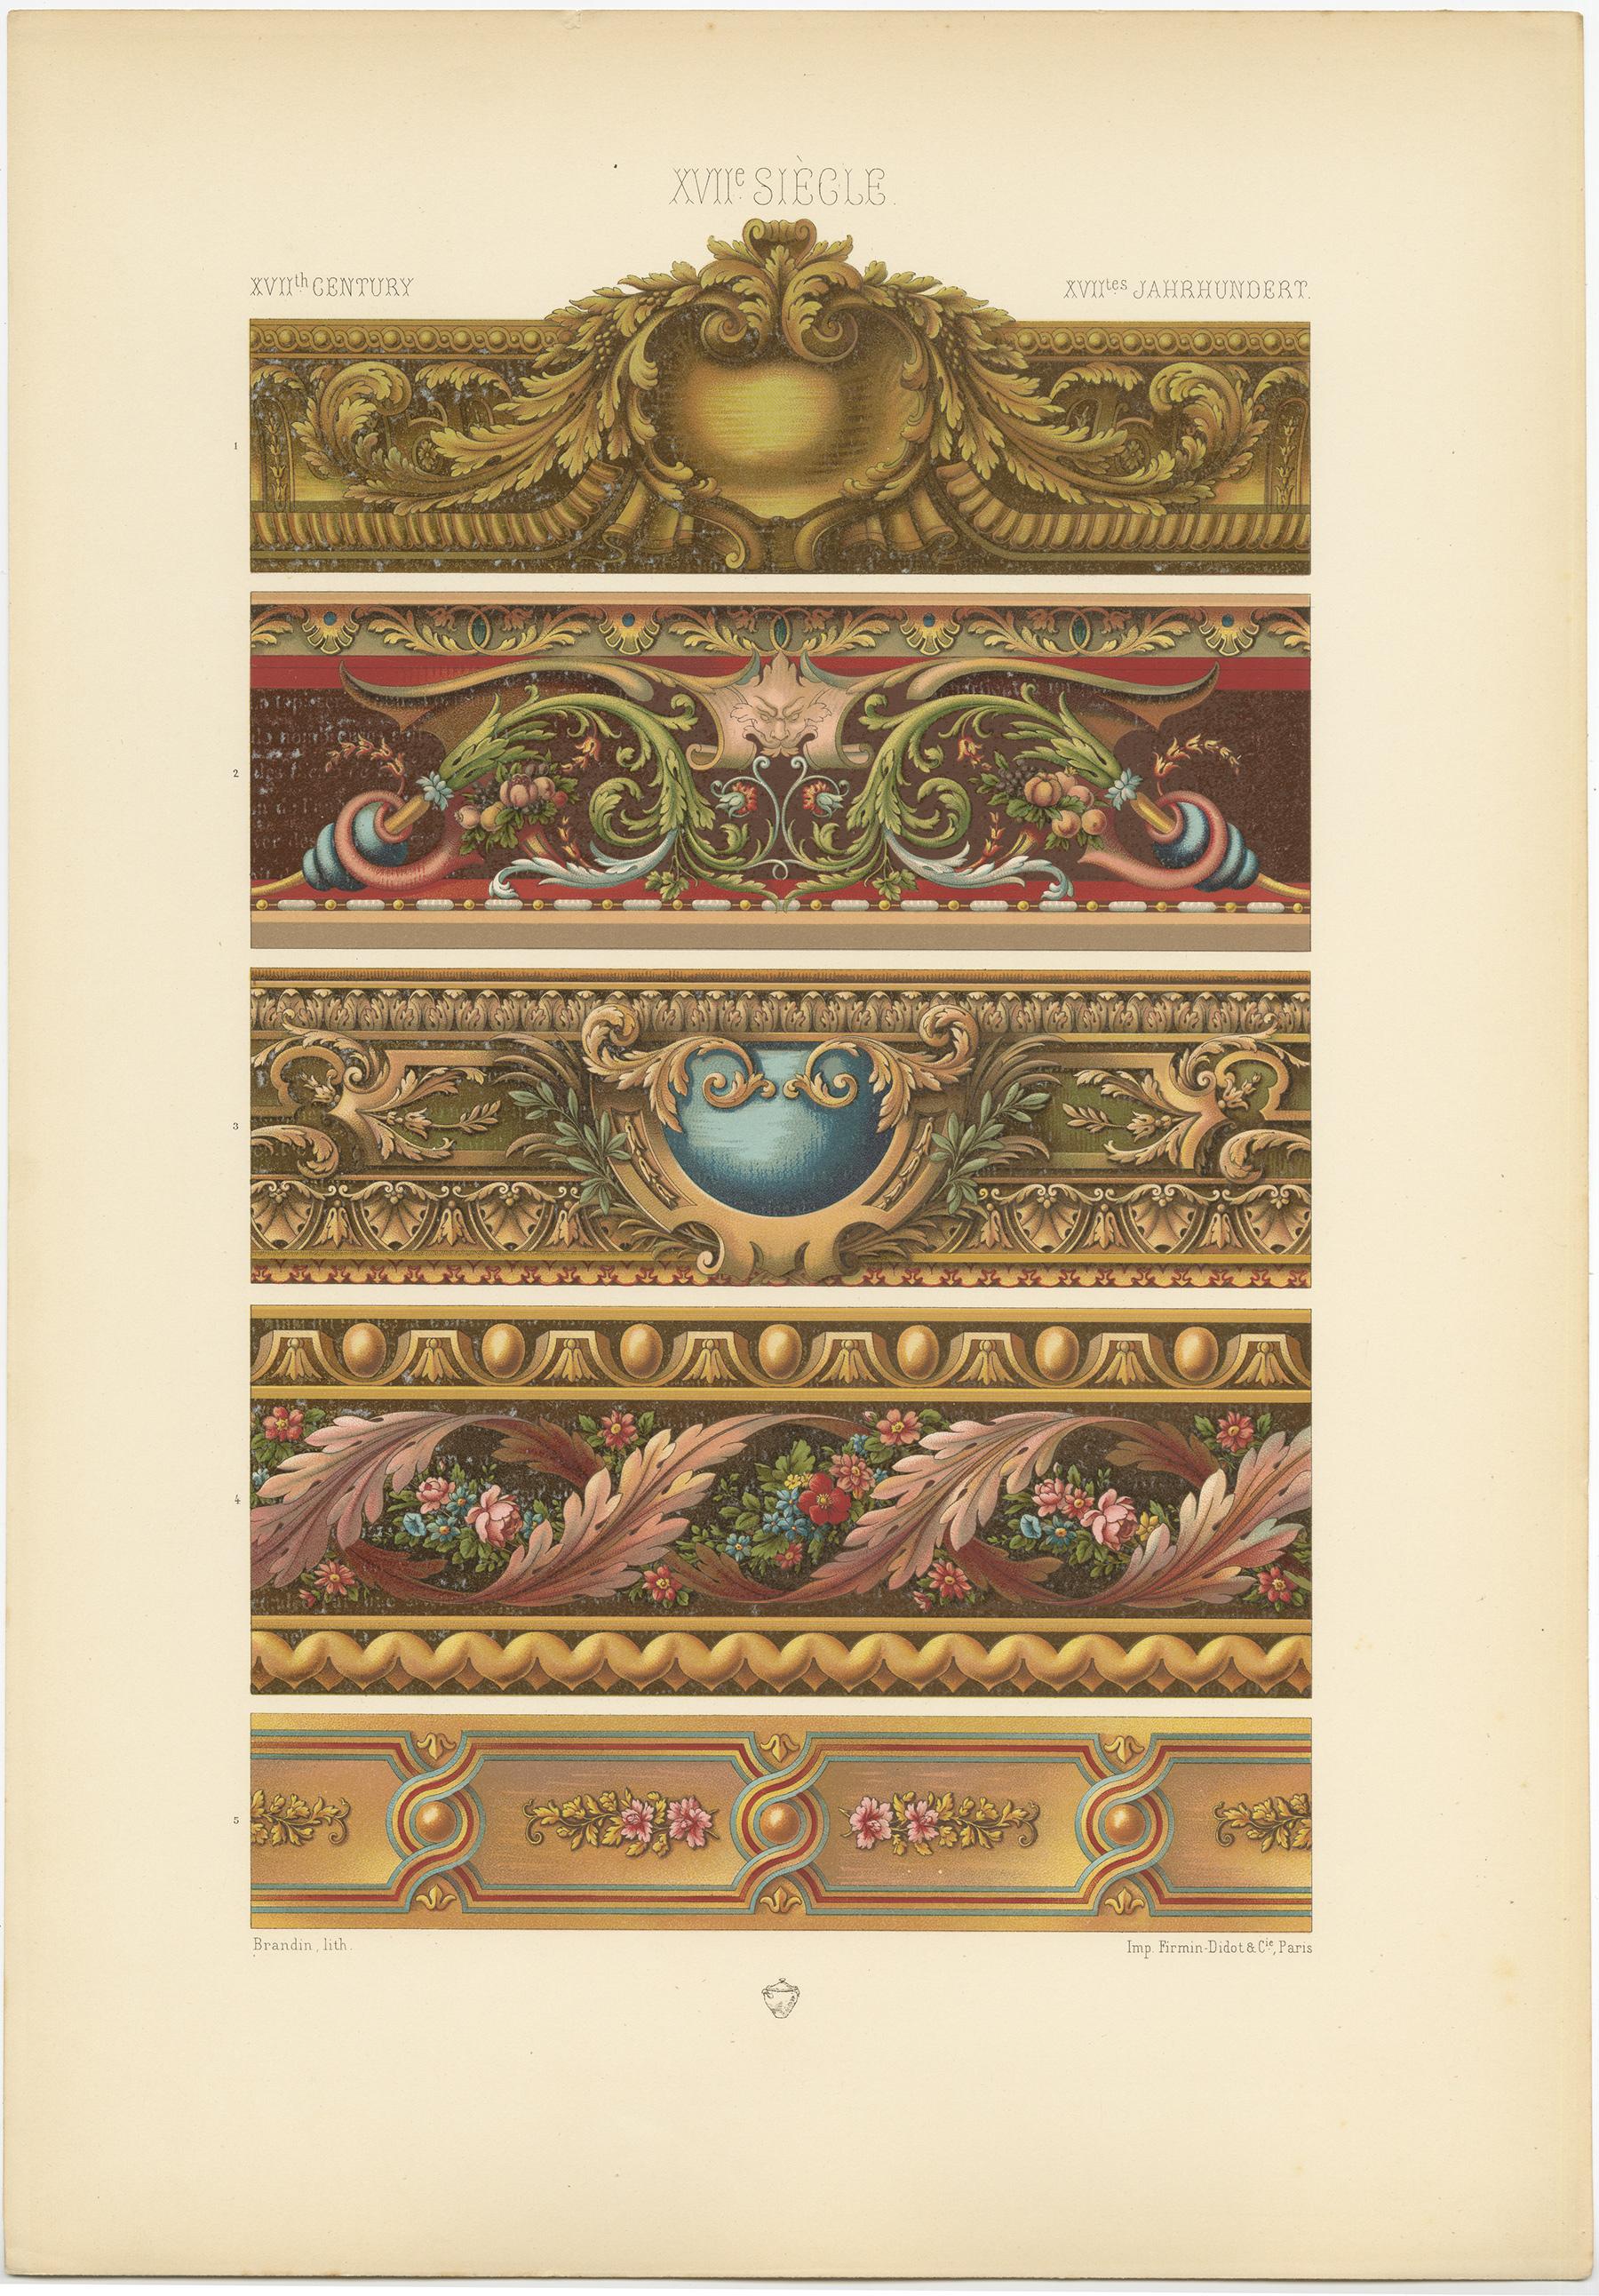 Antique print titled '17th Century - XVIIc Siècle - XVIILes Jahrhundert'. Chromolithograph of details from French tapestries ornaments. This print originates from 'l'Ornement Polychrome' by Auguste Racinet. Published, circa 1890.